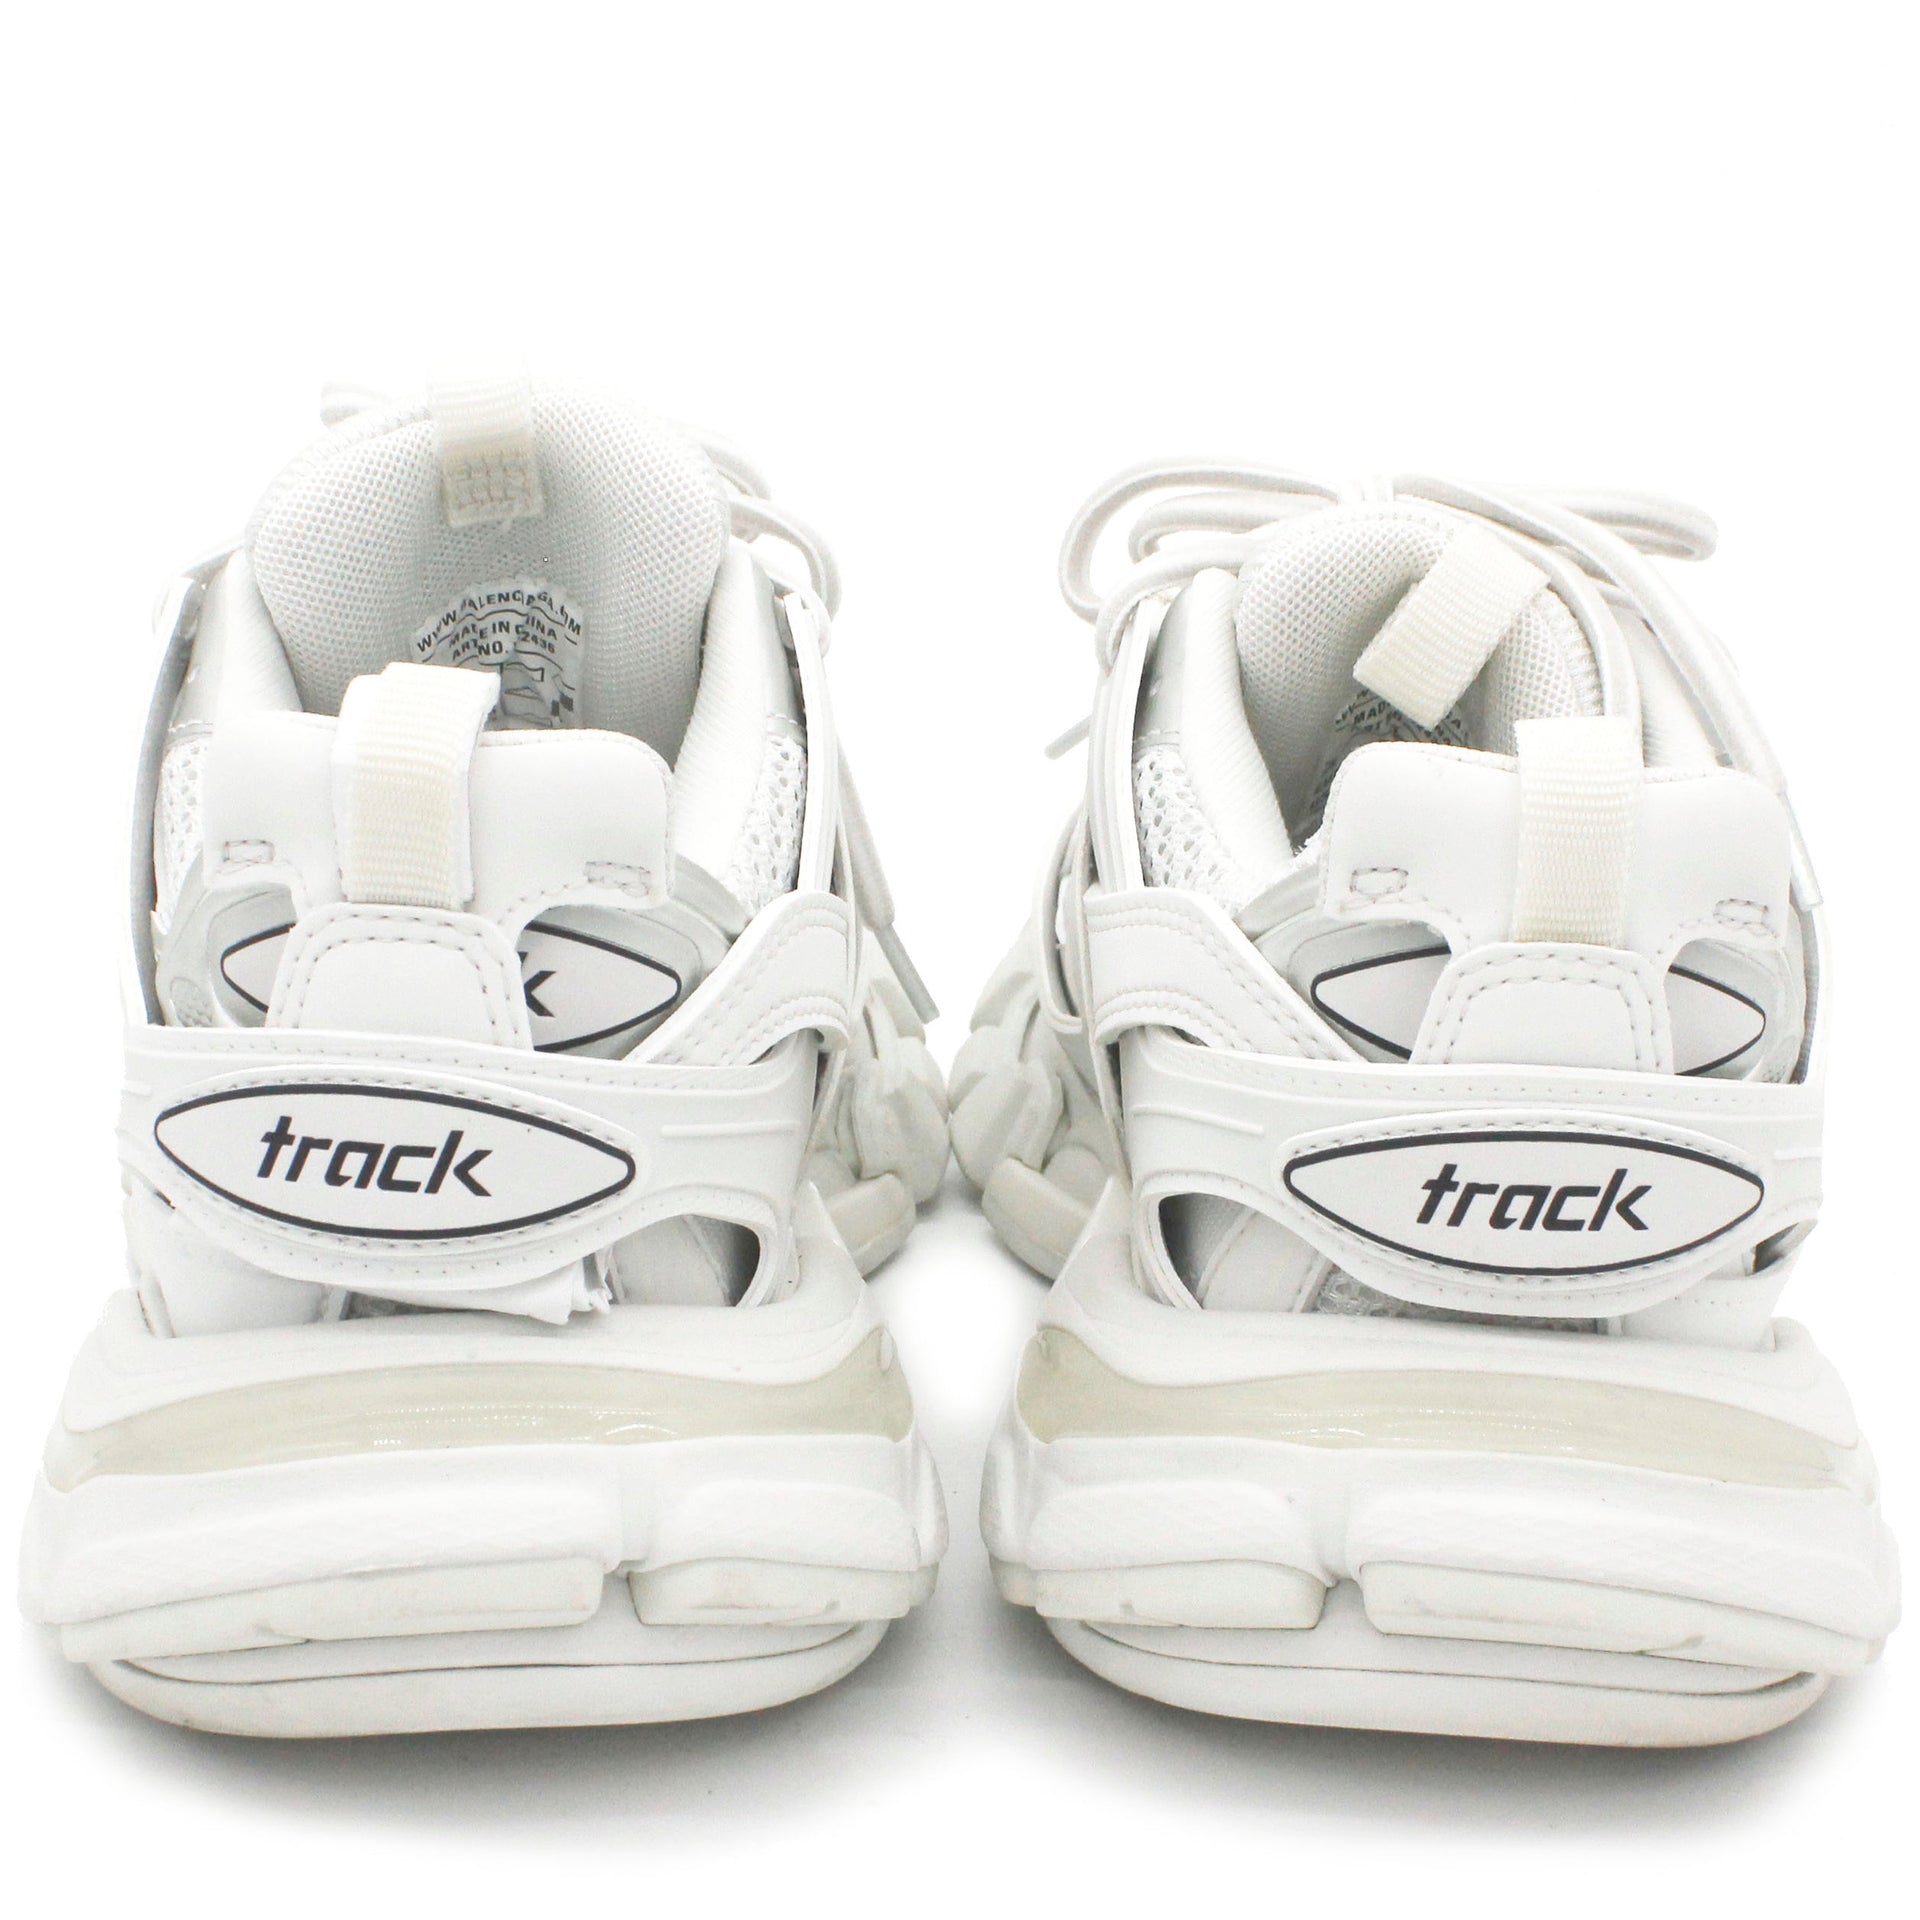 Track sneakers White